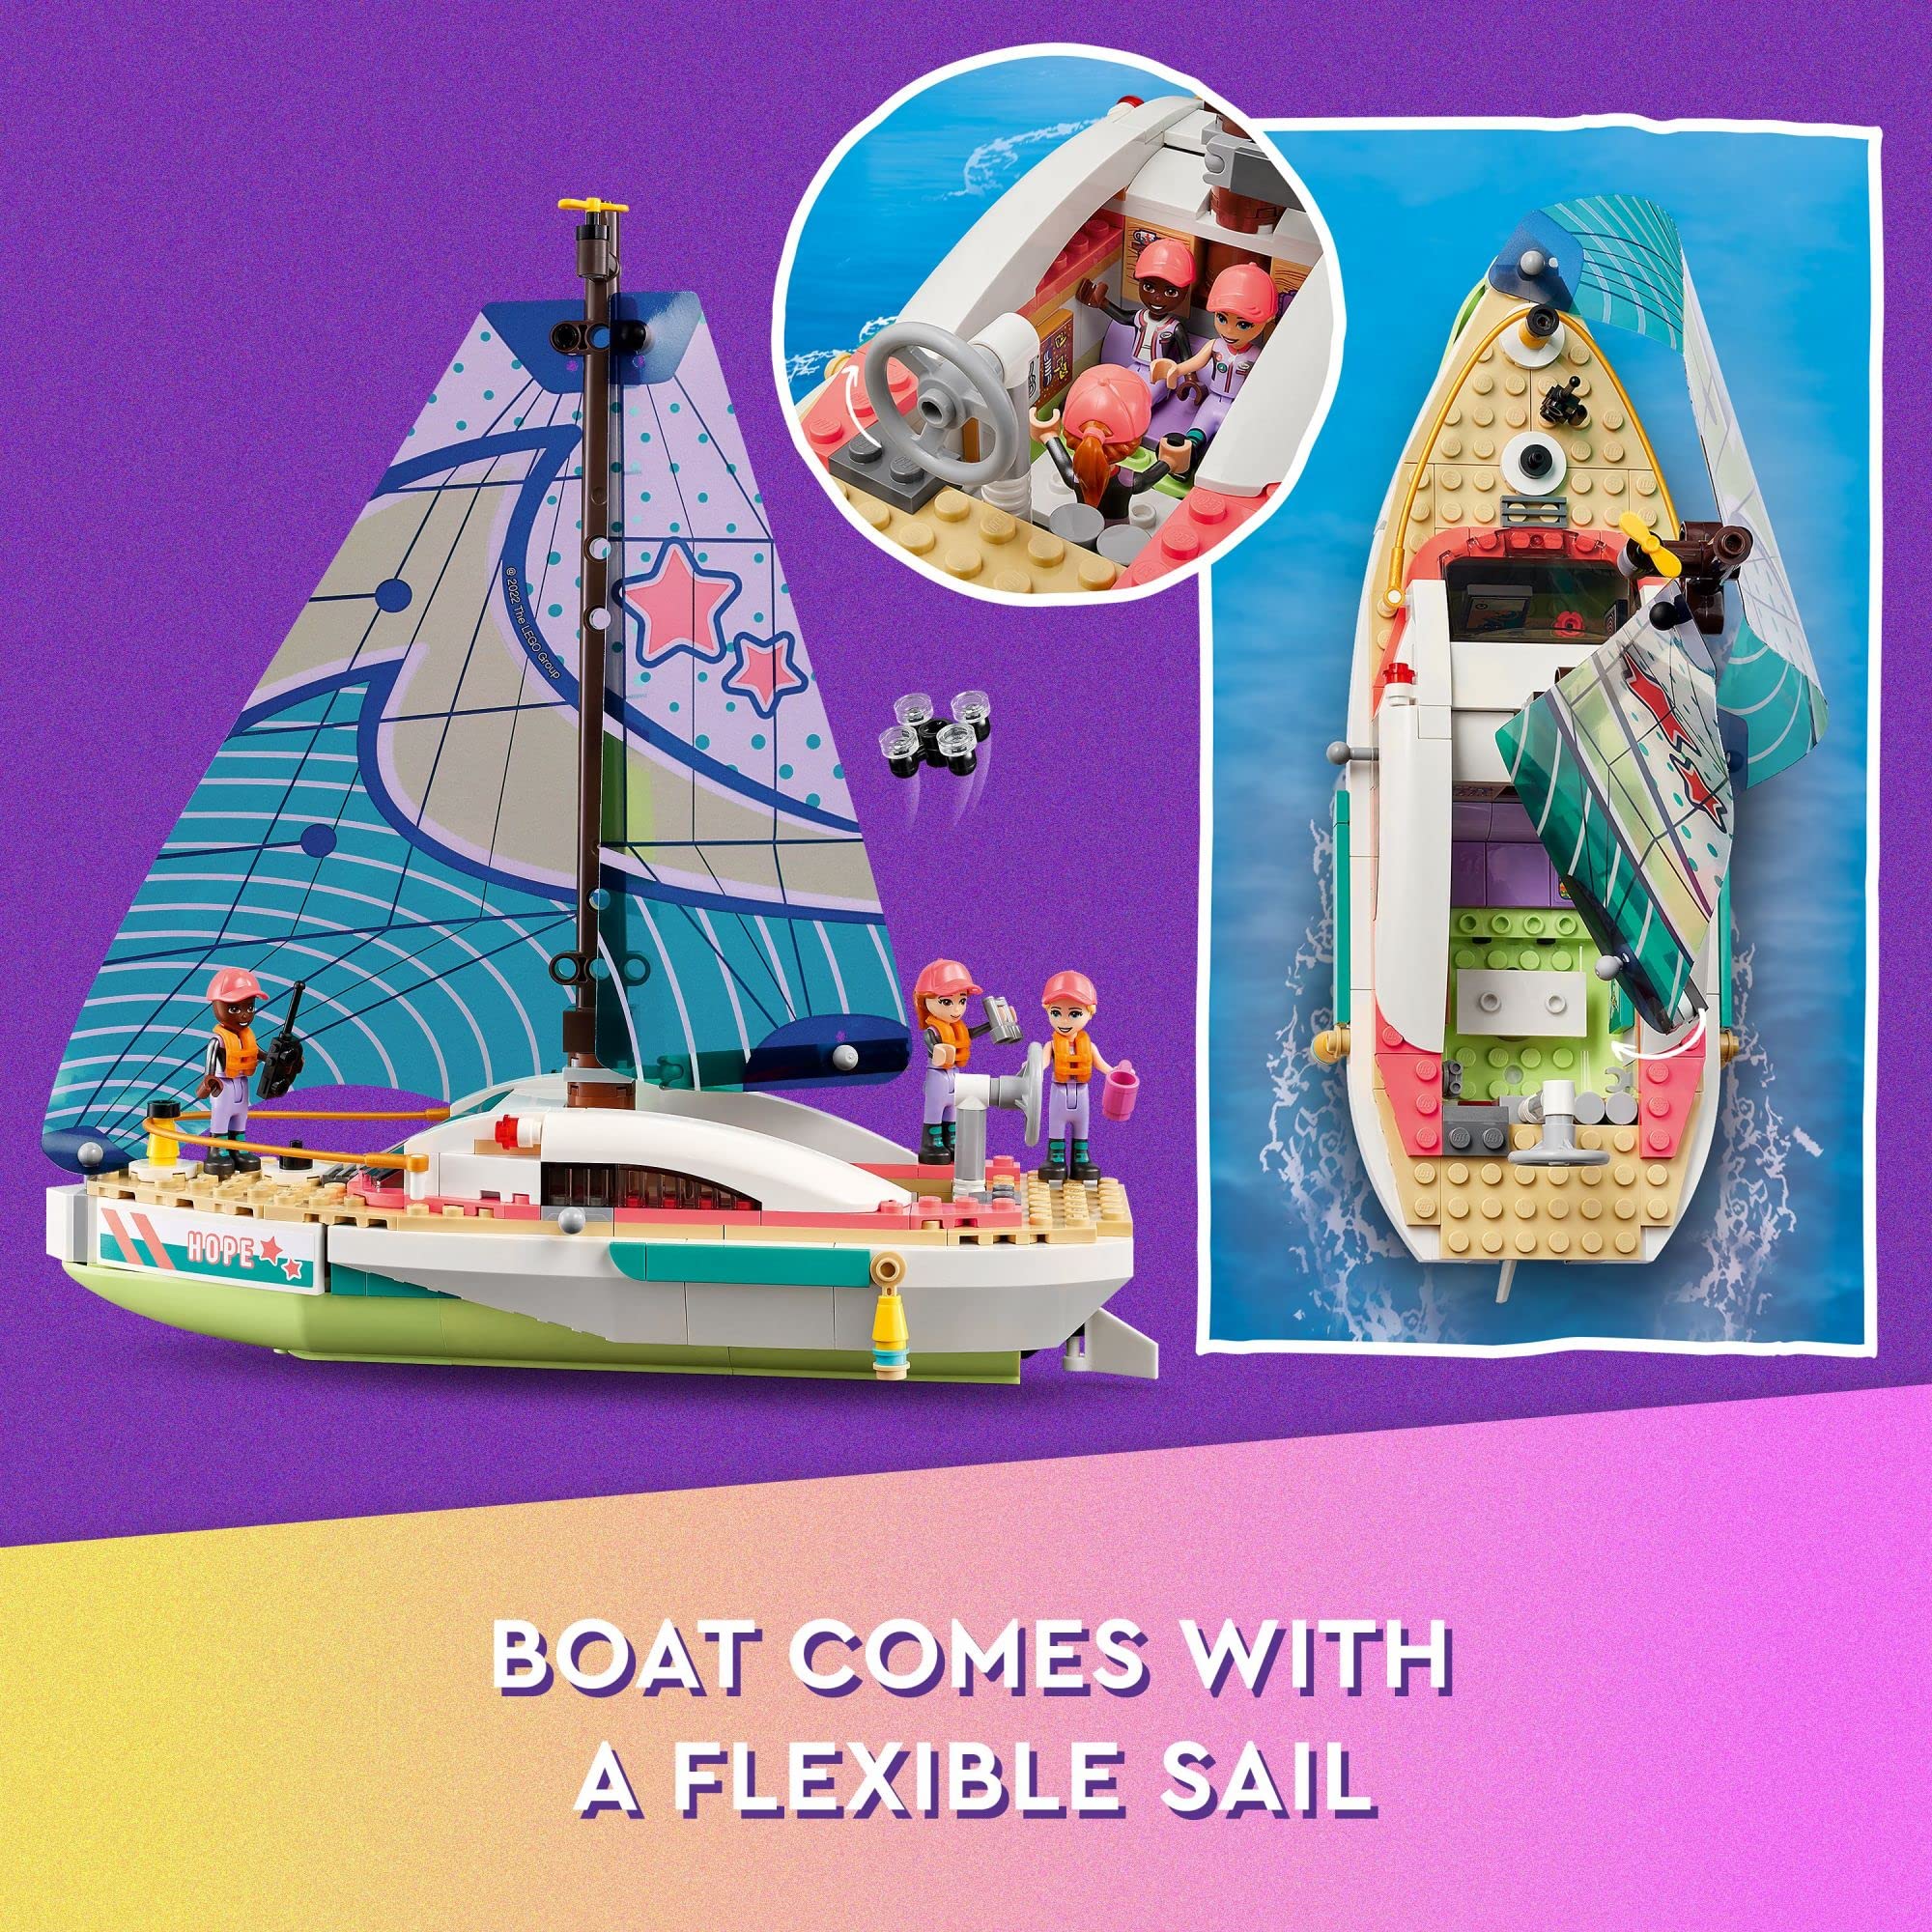 LEGO Friends Stephanie's Sailing Adventure Toy Boat Set 41716, Sailboat Building Toy with Island, Drone, and 3 Mini Figures, Creative Sailing Gift for Kids, Girls, Boys Age 7+ Years Old